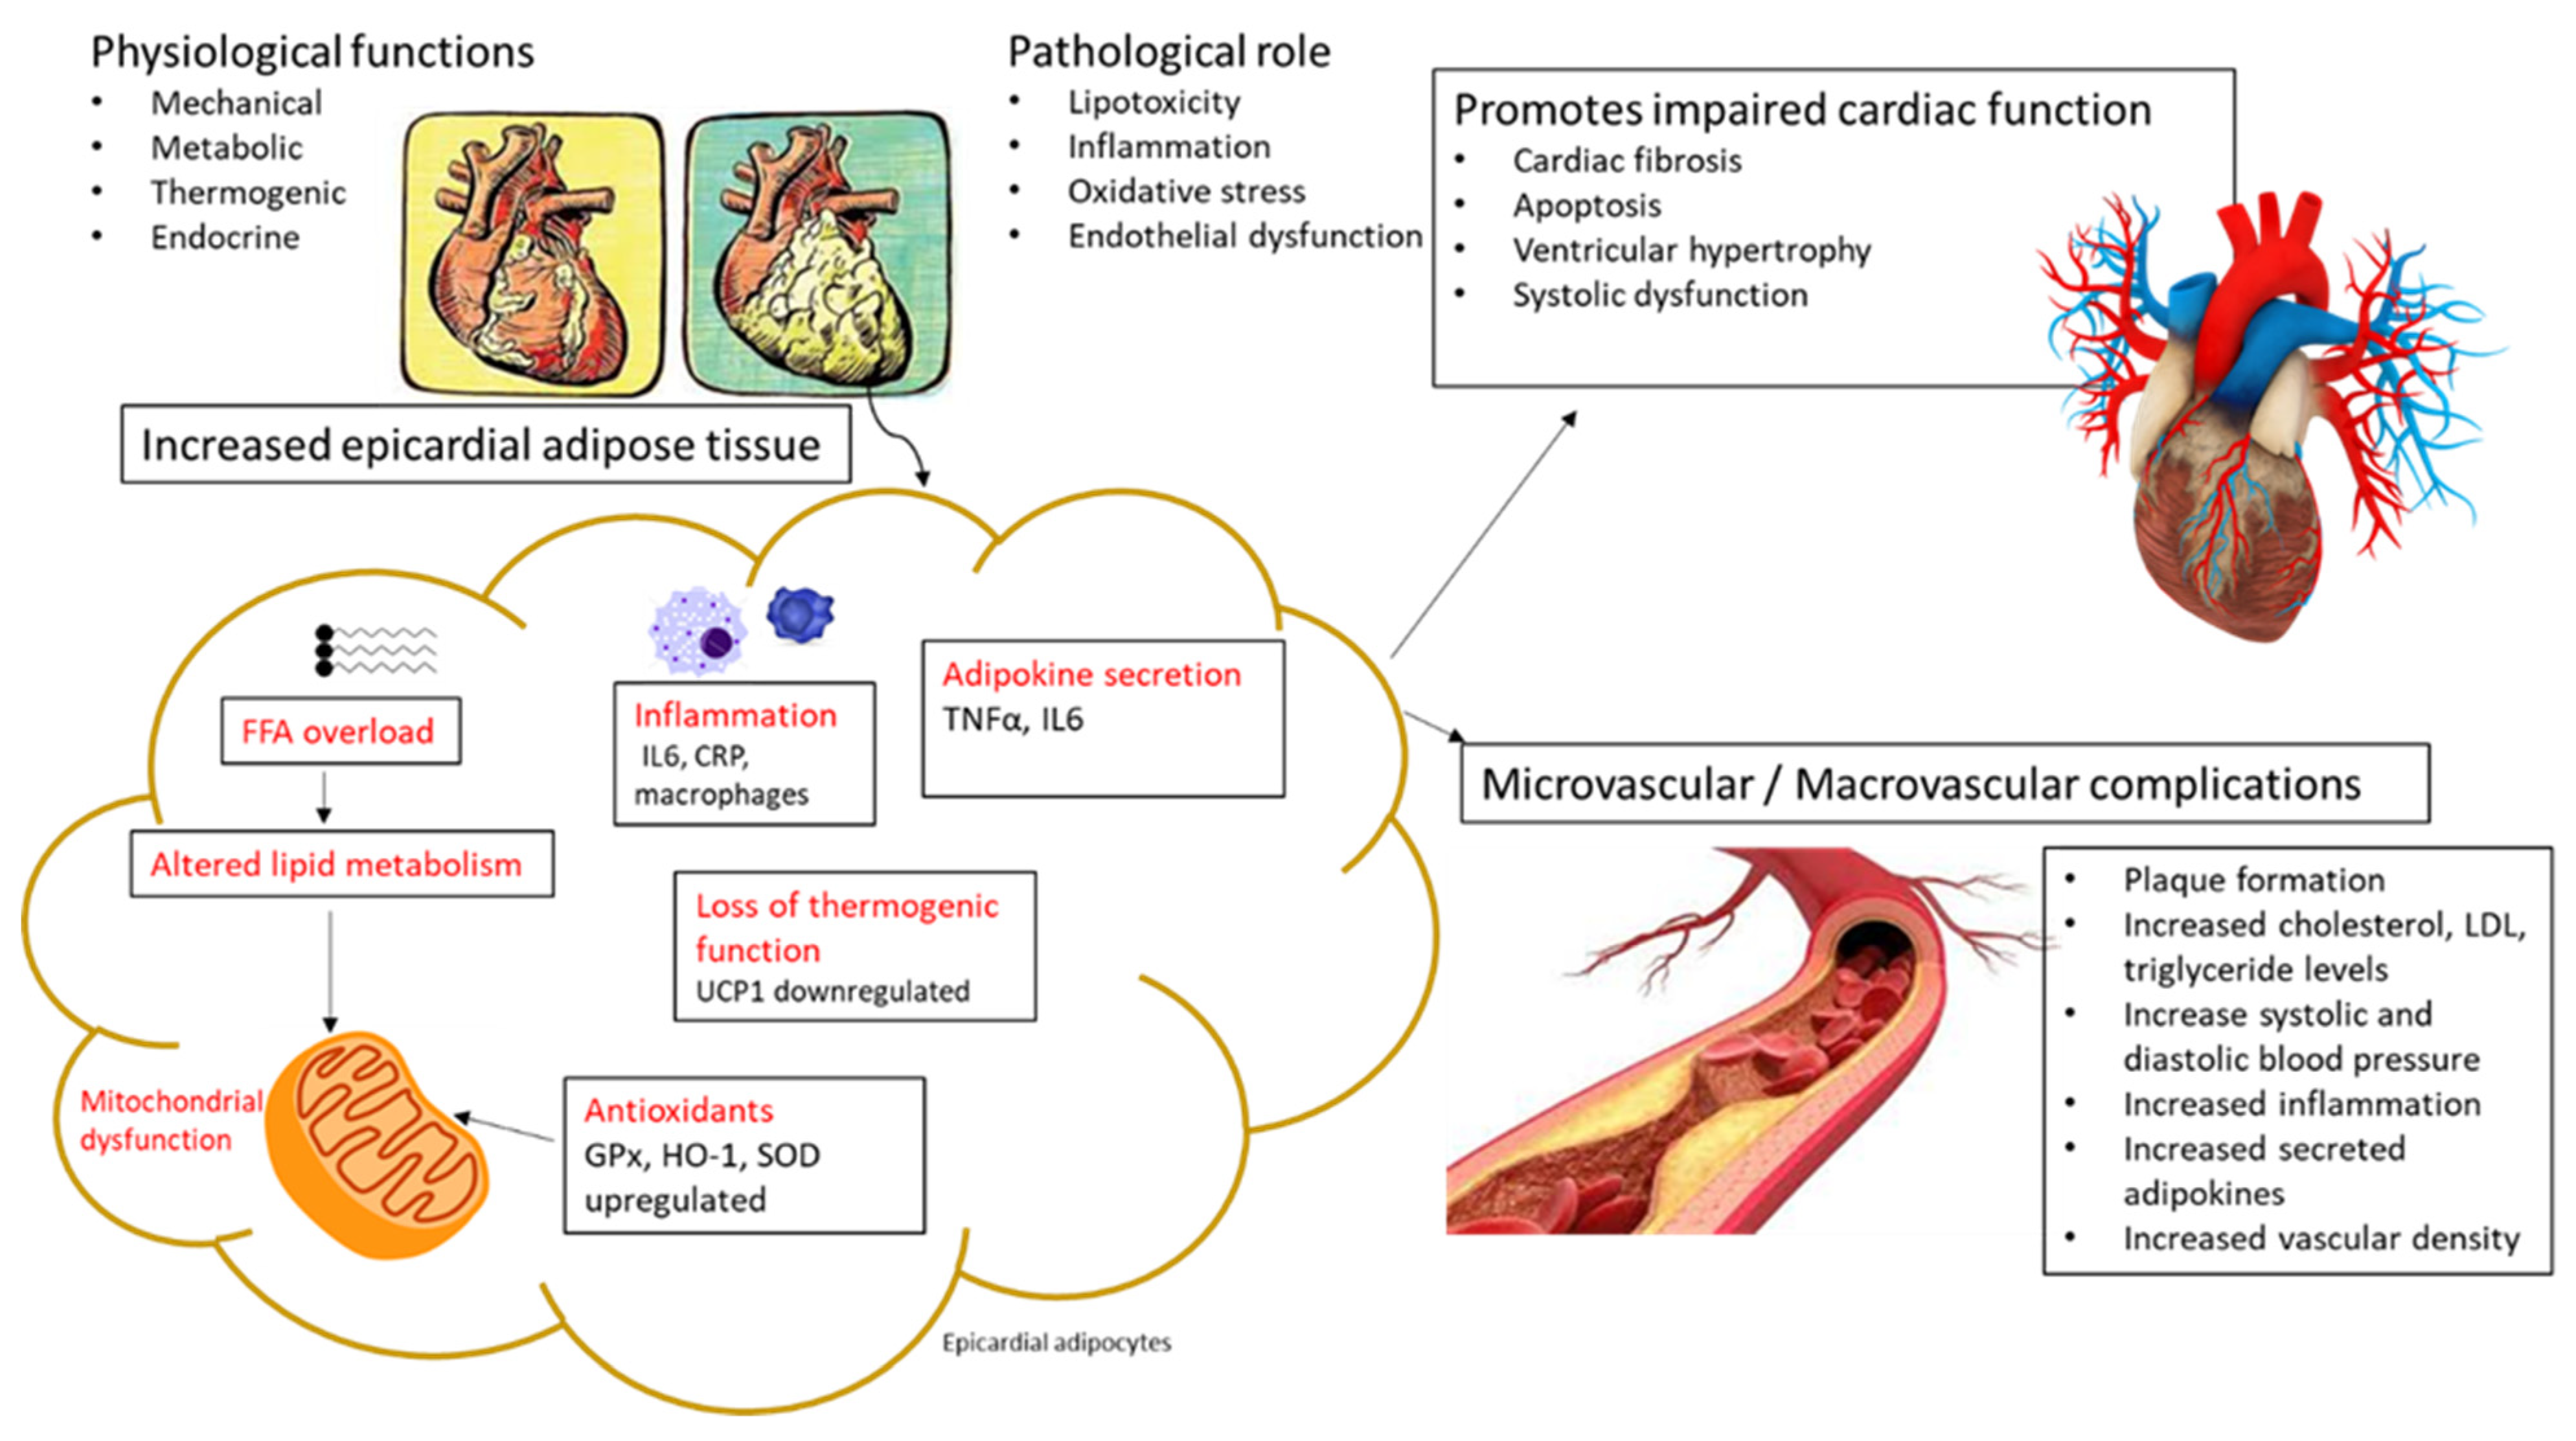 Thermogenic effects on the heart